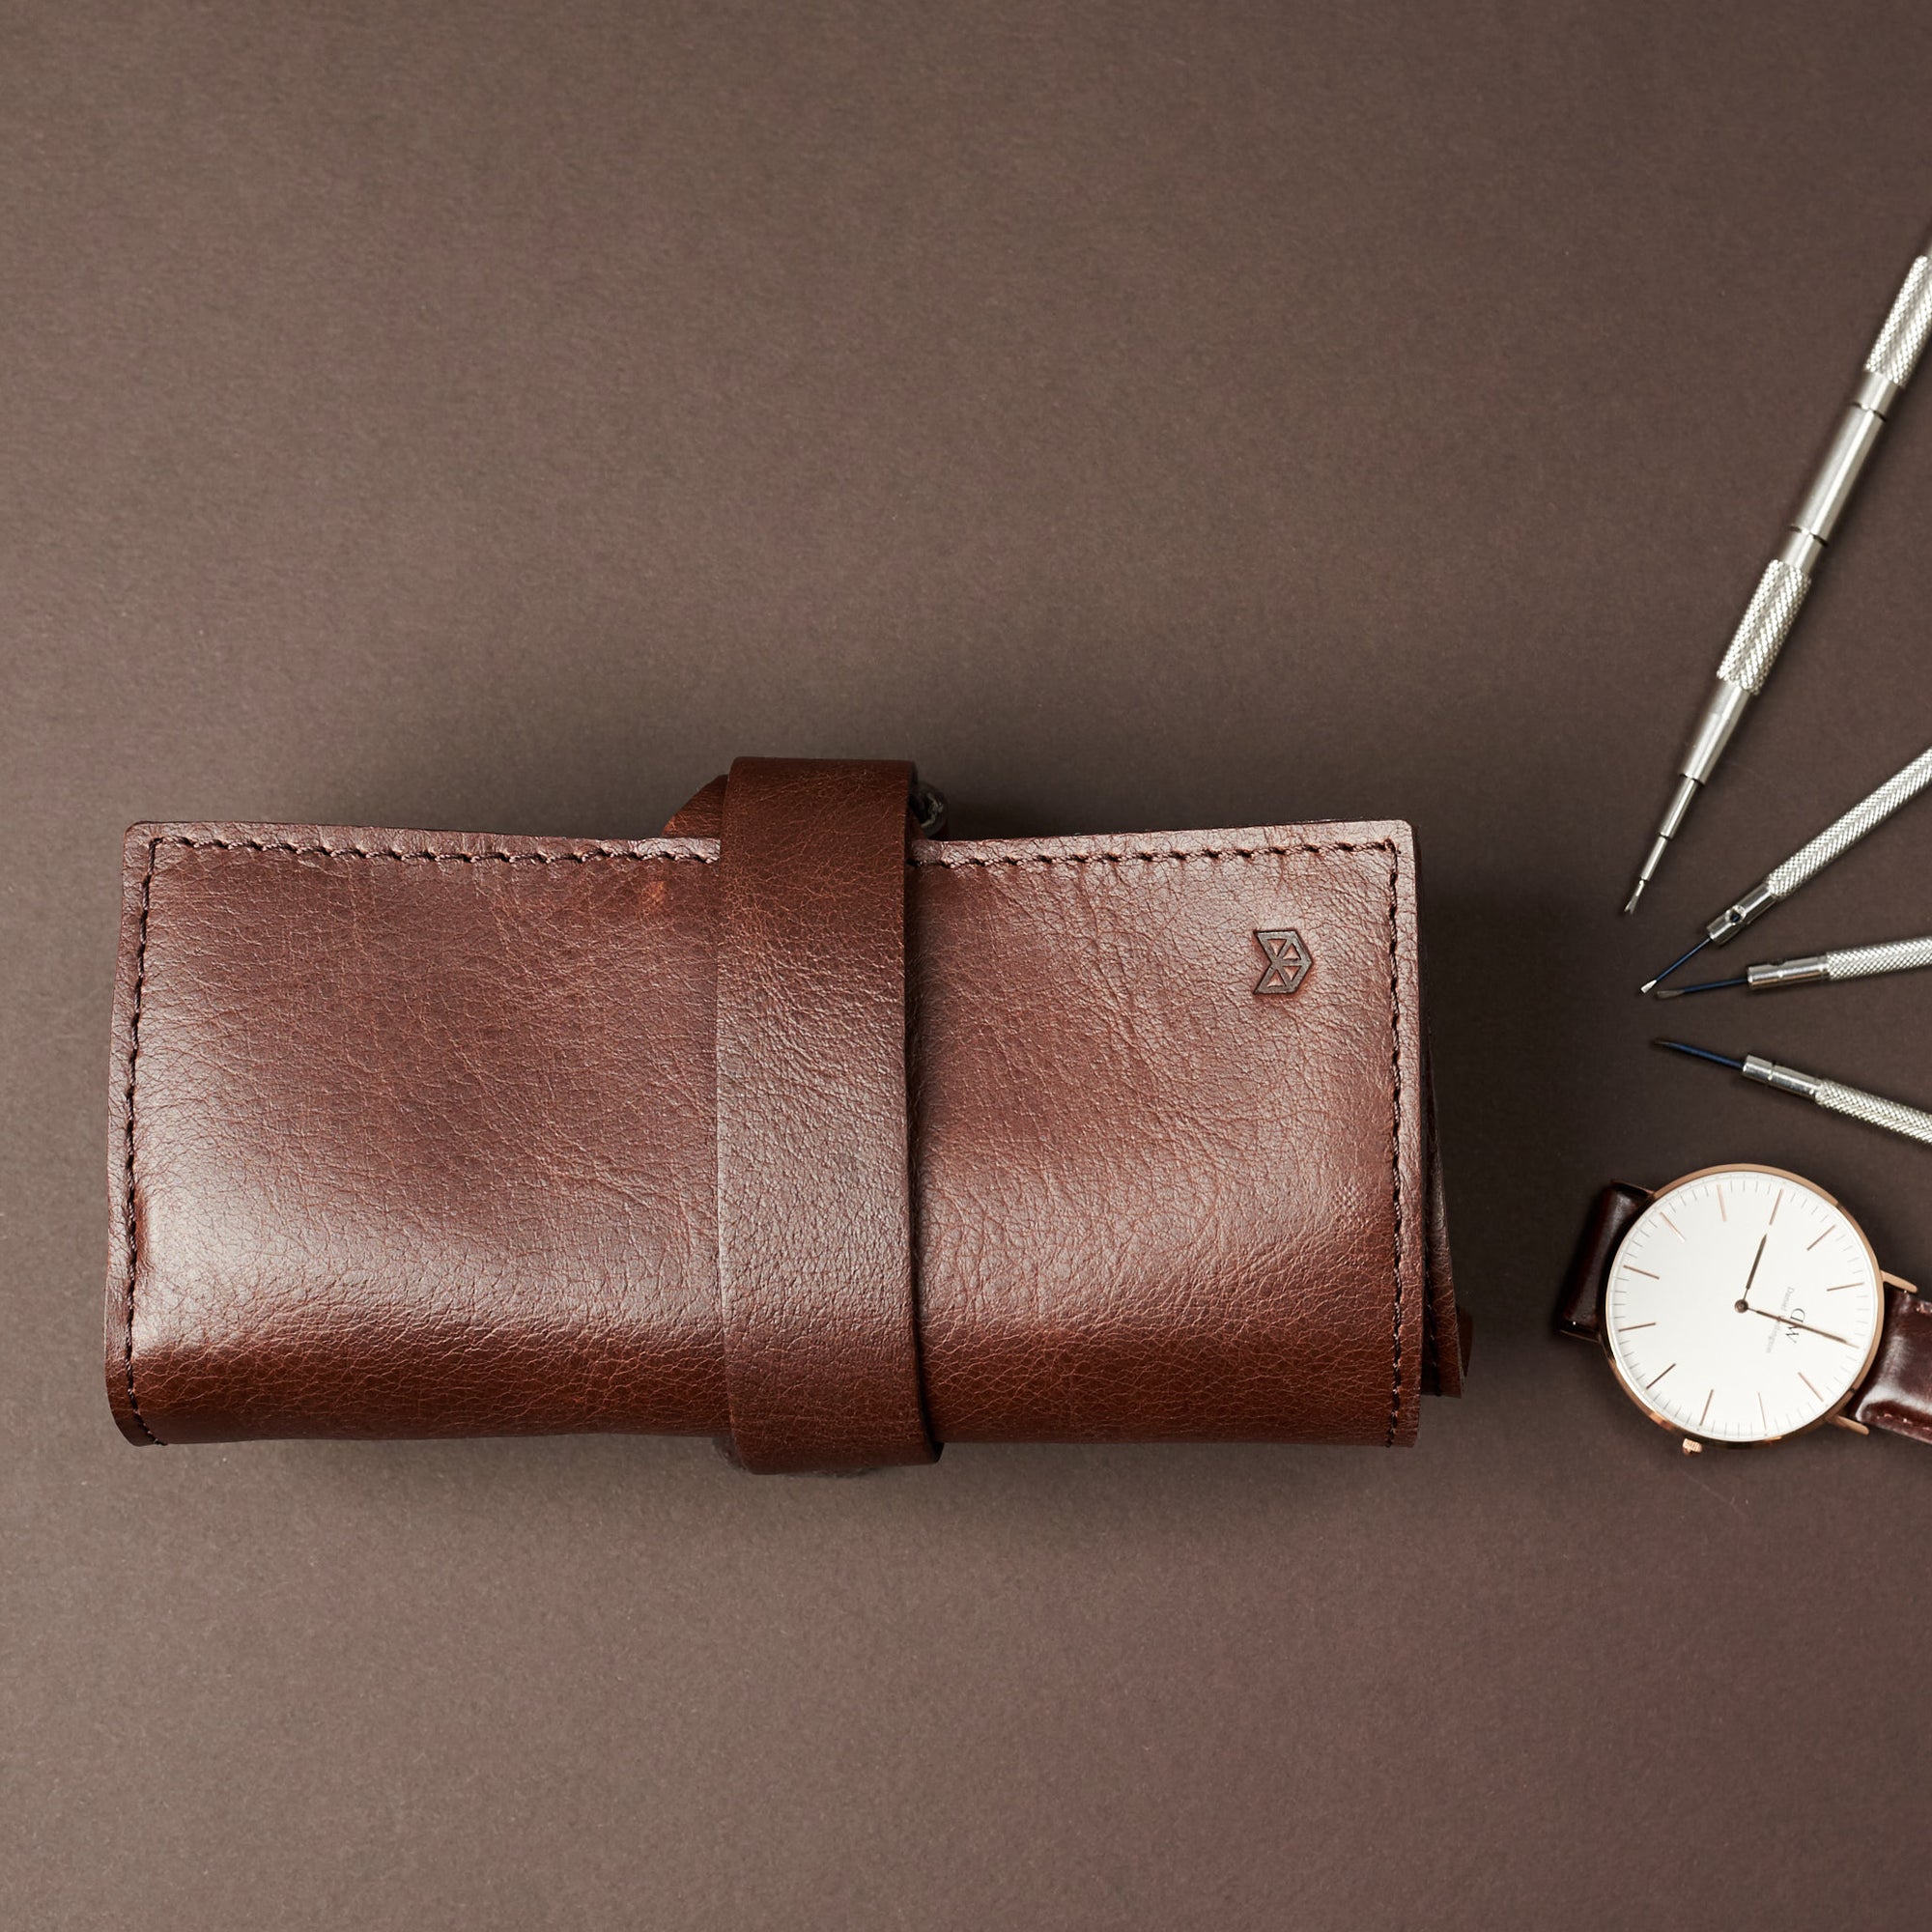 Royce watch roll. Pocket watch pouch brown by Capra Leather